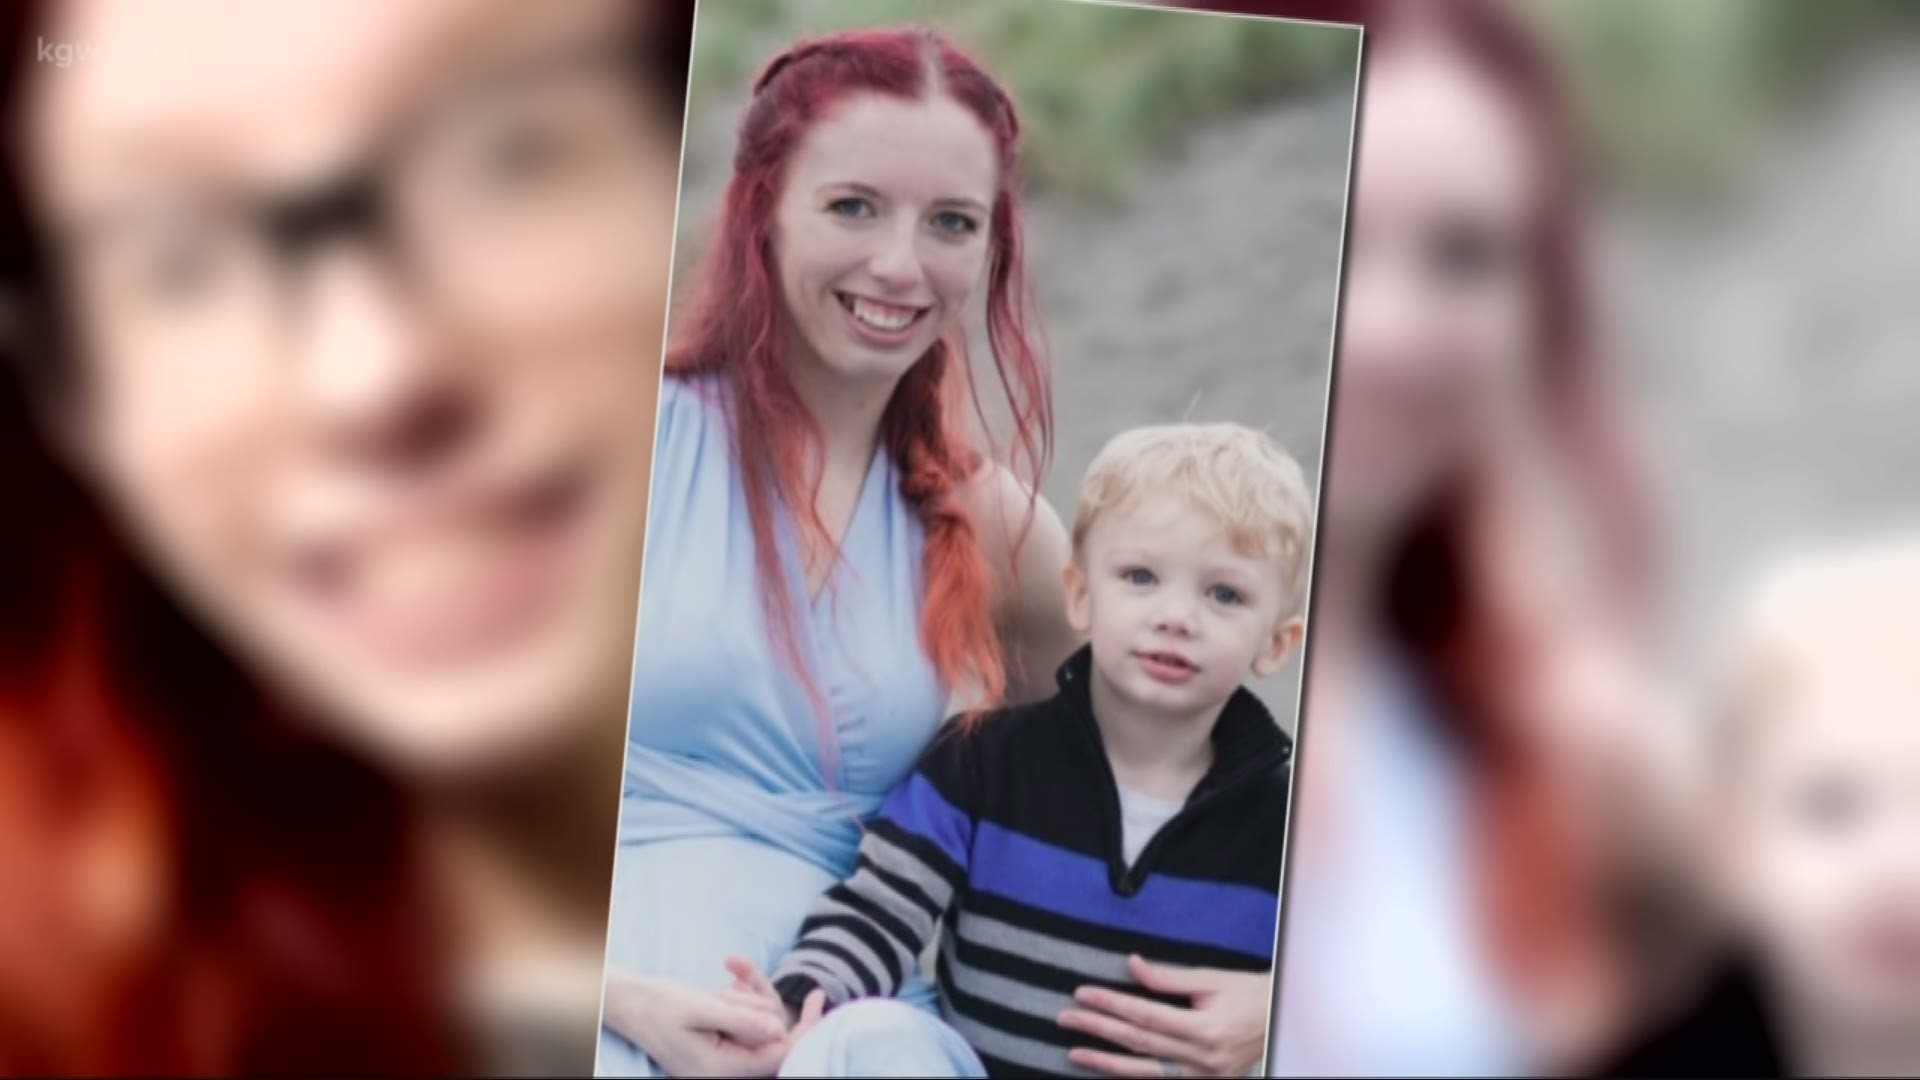 Neighbors express shock and grief after the bodies of 25-year-old Karissa Fretwell and her 3-year-old son, Billy, were found in a remote area of Yamhill County.